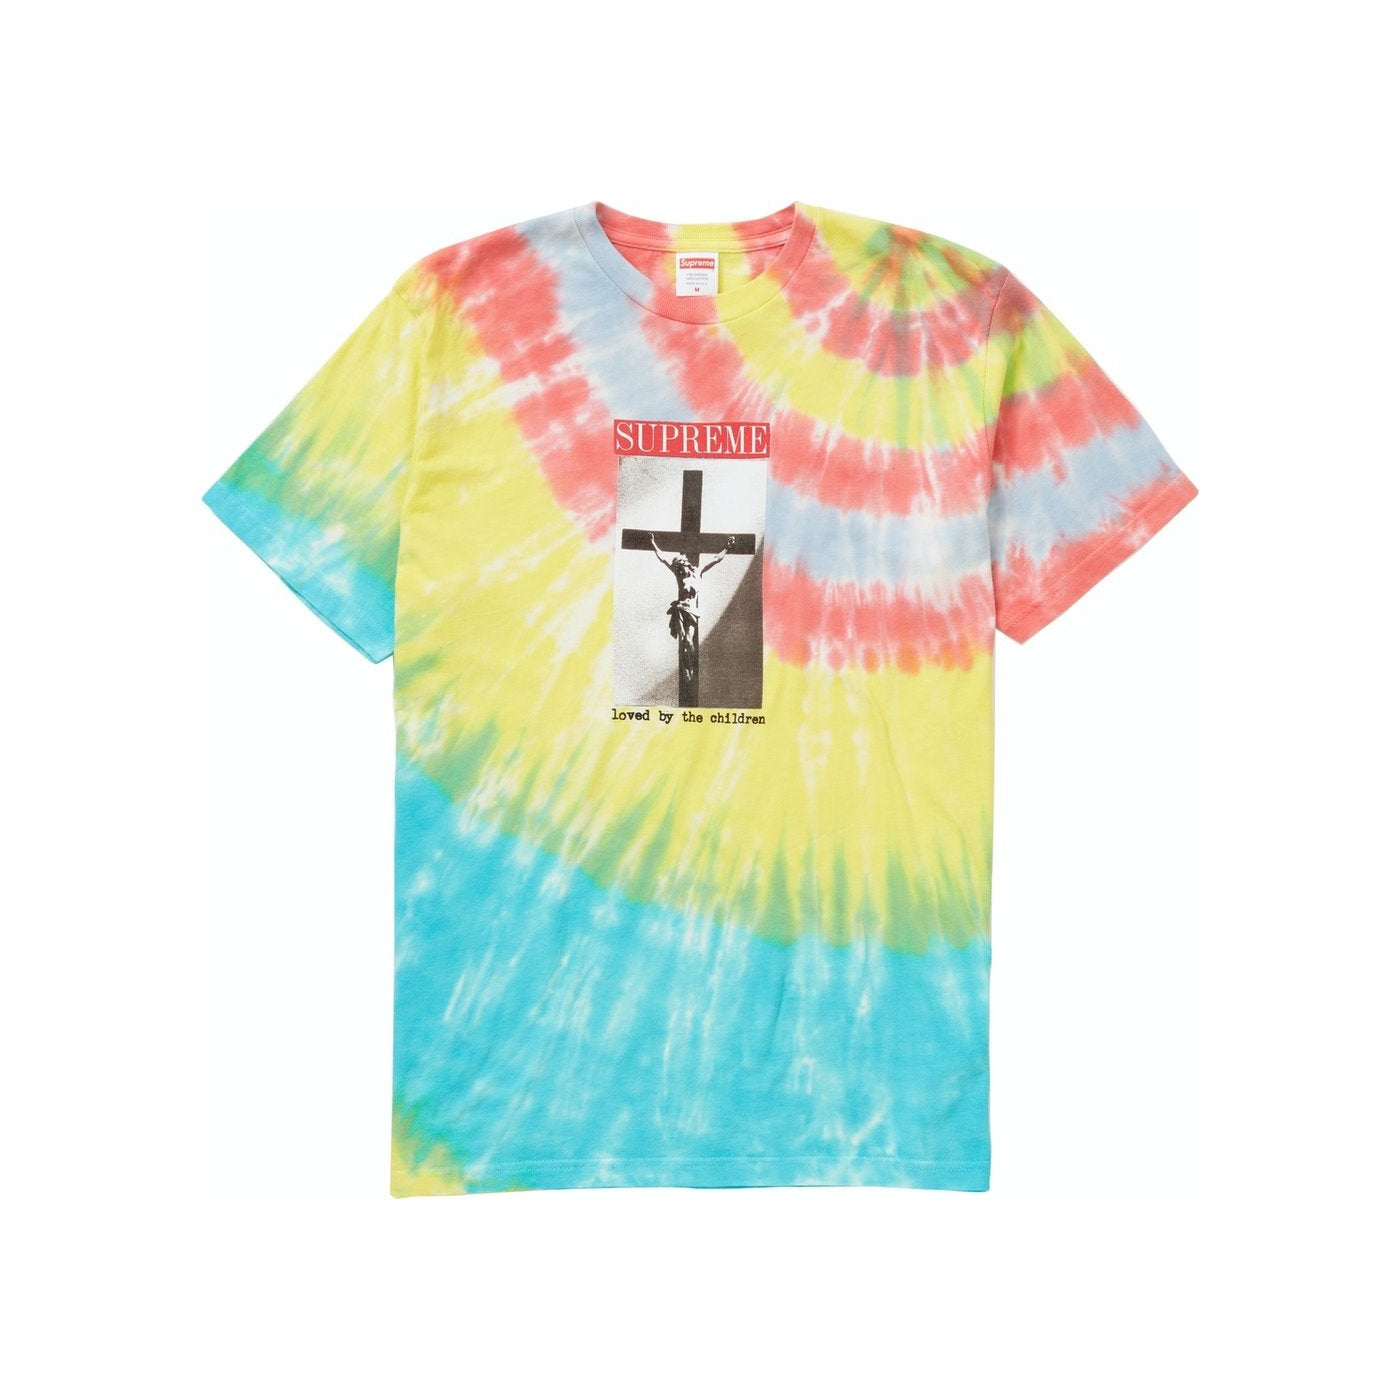 Supreme Loved By The Children Tee Tie Dye SS20 - Centrall Online